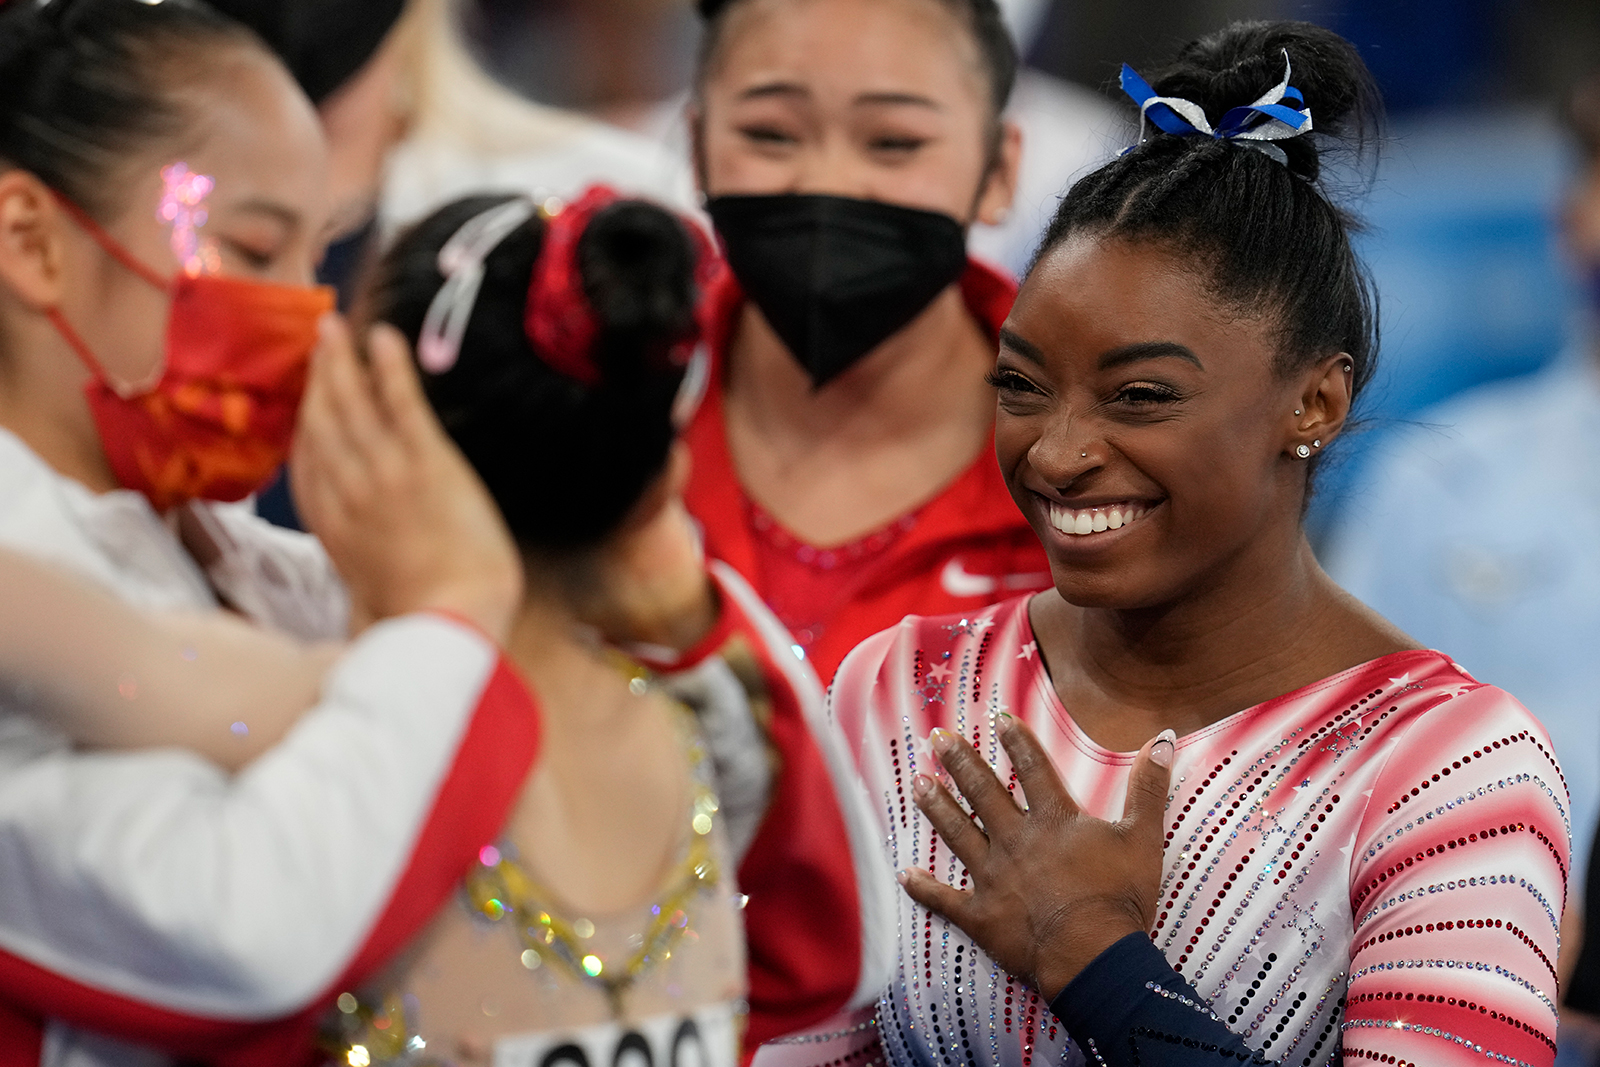 American gymnast Simone Biles smiles as China's Tang Xijing embraces teammate Guan Chenchen at the balance beam final on August 3.